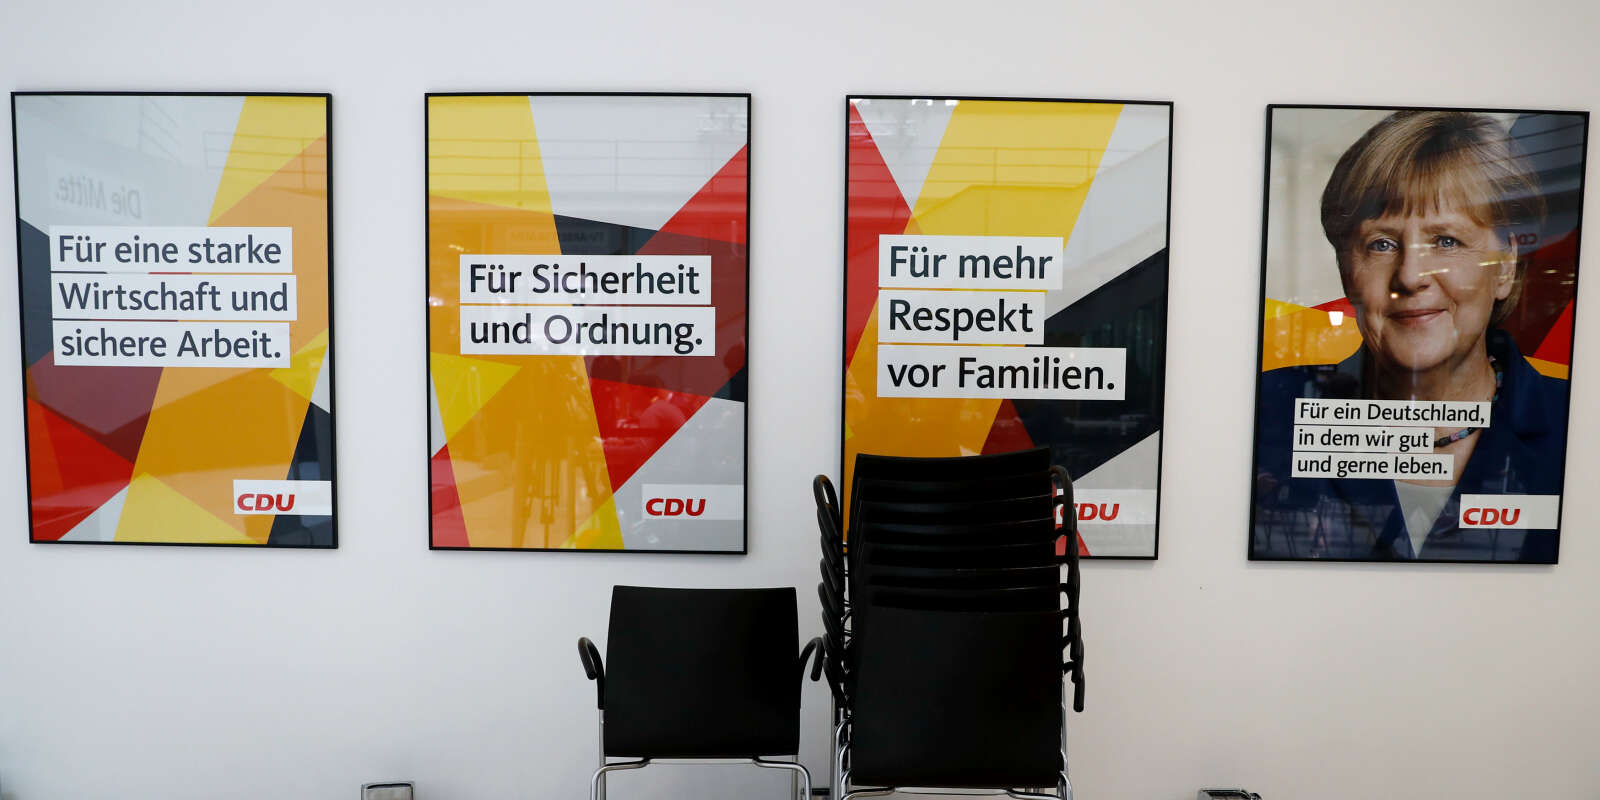 Posters of Christian Democratic Union CDU party leader and German Chancellor Angela Merkel and of CDU election campaign slogans are seen at the CDU party headquarters, a day after the general election (Bundestagswahl) in Berlin, Germany September 25, 2017. Posters read: 'For a strong economy and job security', 'For security and order', 'For more respect of families' and 'For a Germany that we like to live in'. REUTERS/Kai Pfaffenbach